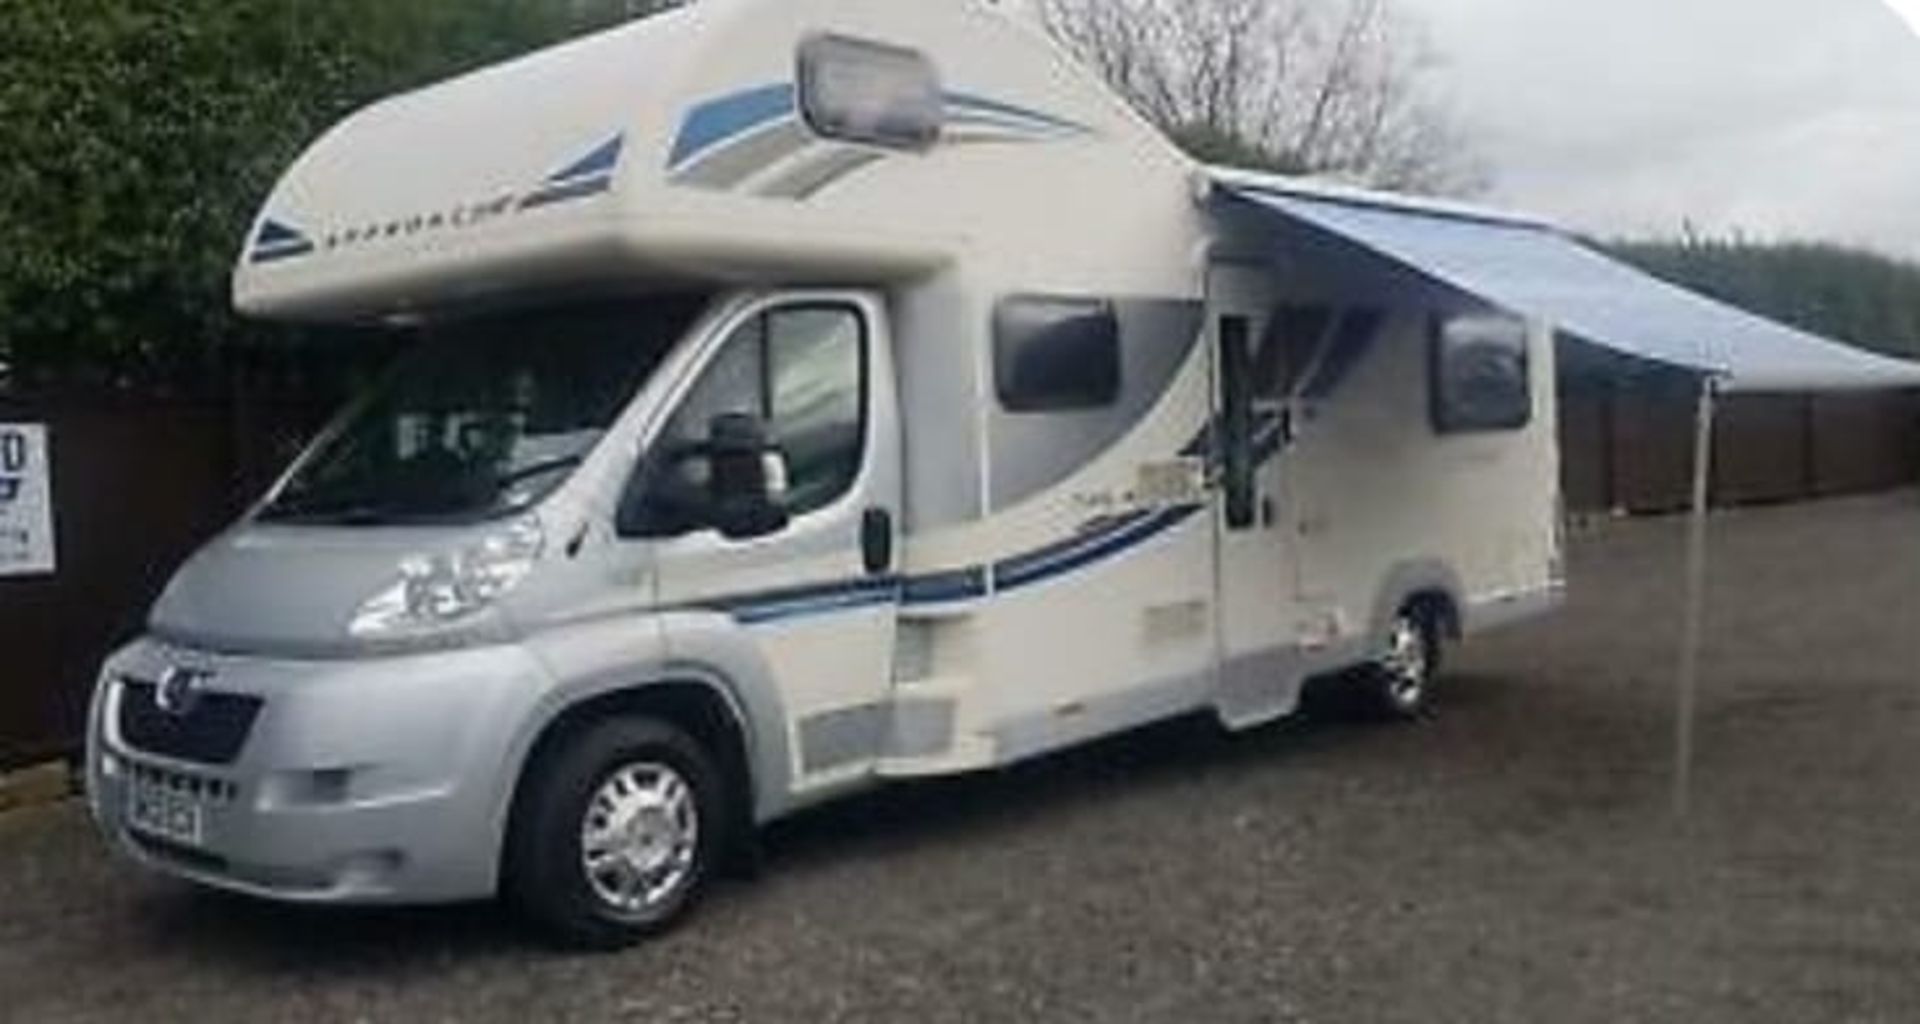 2012 BAILEY APPROACH 760 SE LUXURY 6 BERTH MOTORHOME £10K OF EXTRAS, 30,000 MILES FROM NEW - Image 12 of 31